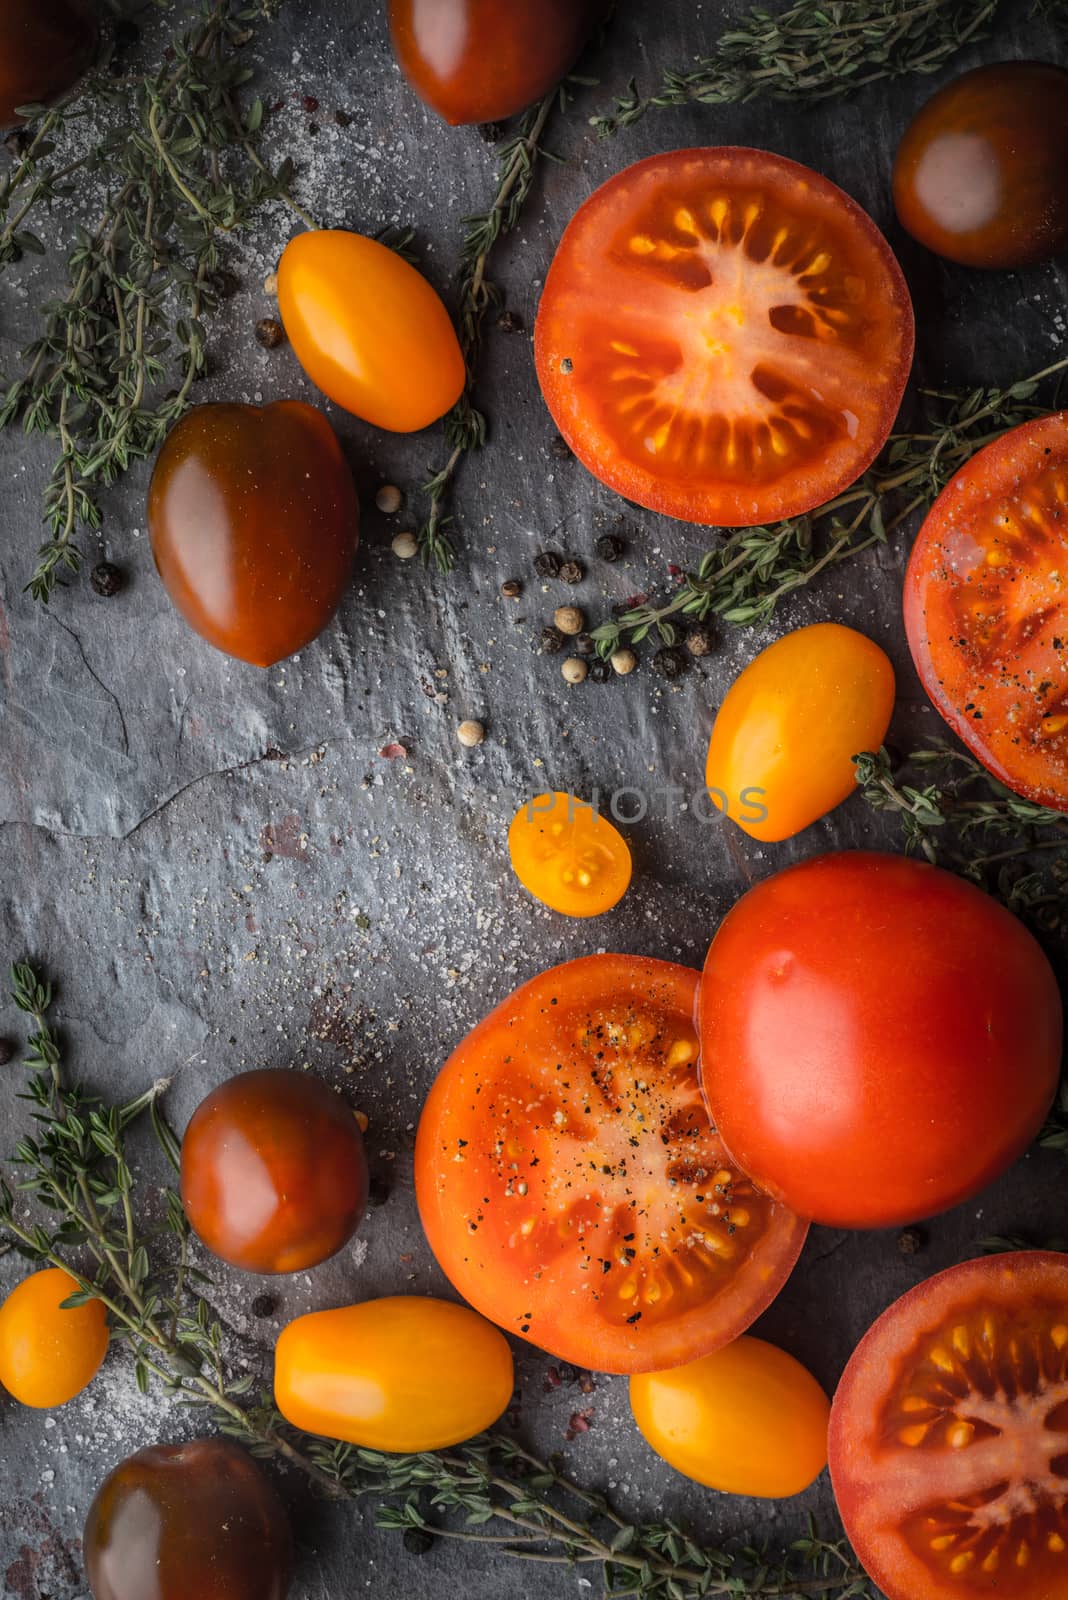 Tomatoes mix  with herbs on the stone table vertical